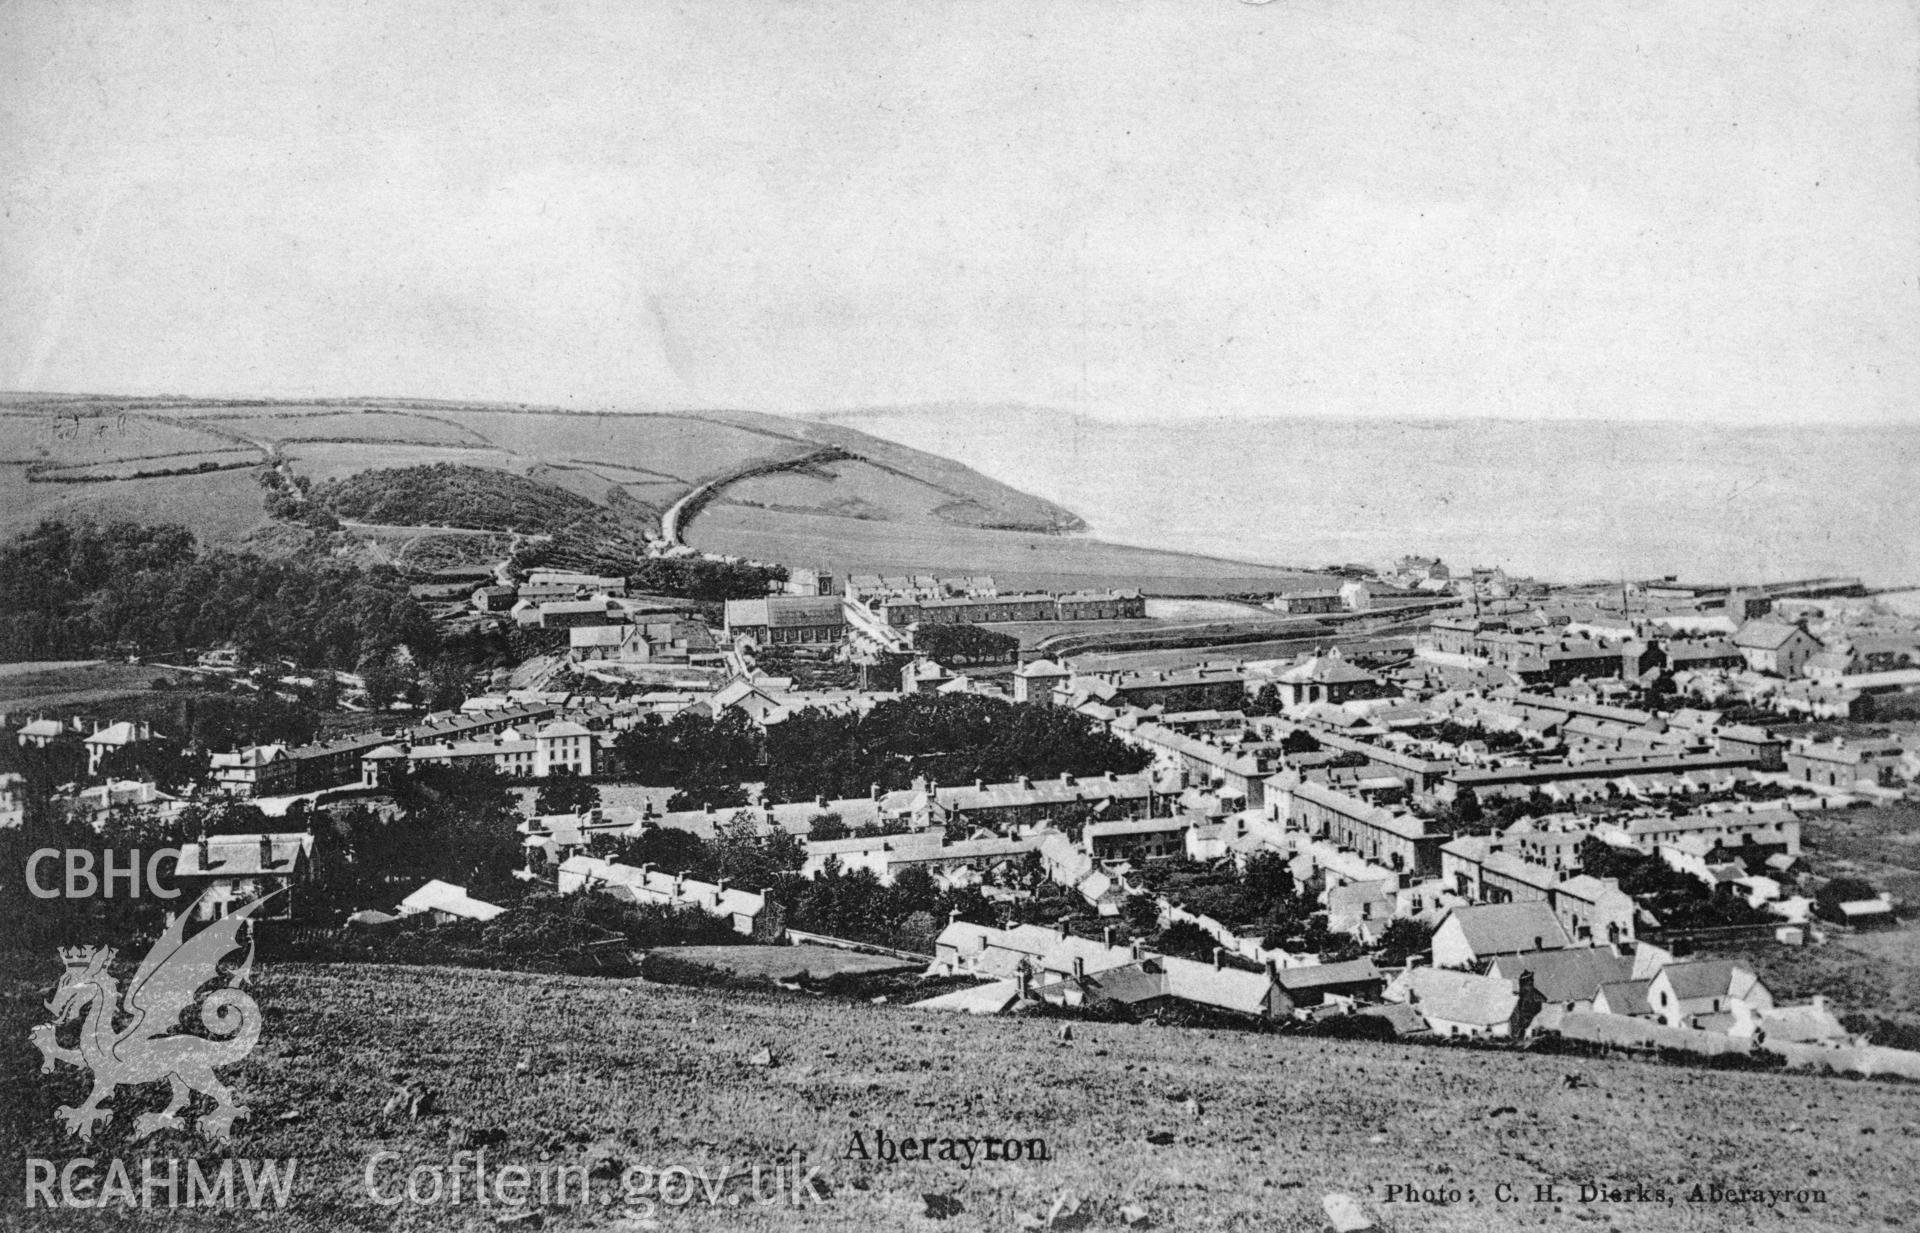 Digital copy of postcard showing Aberaeron, dated early 20th century.  Loaned for copying by Charlie Downes.